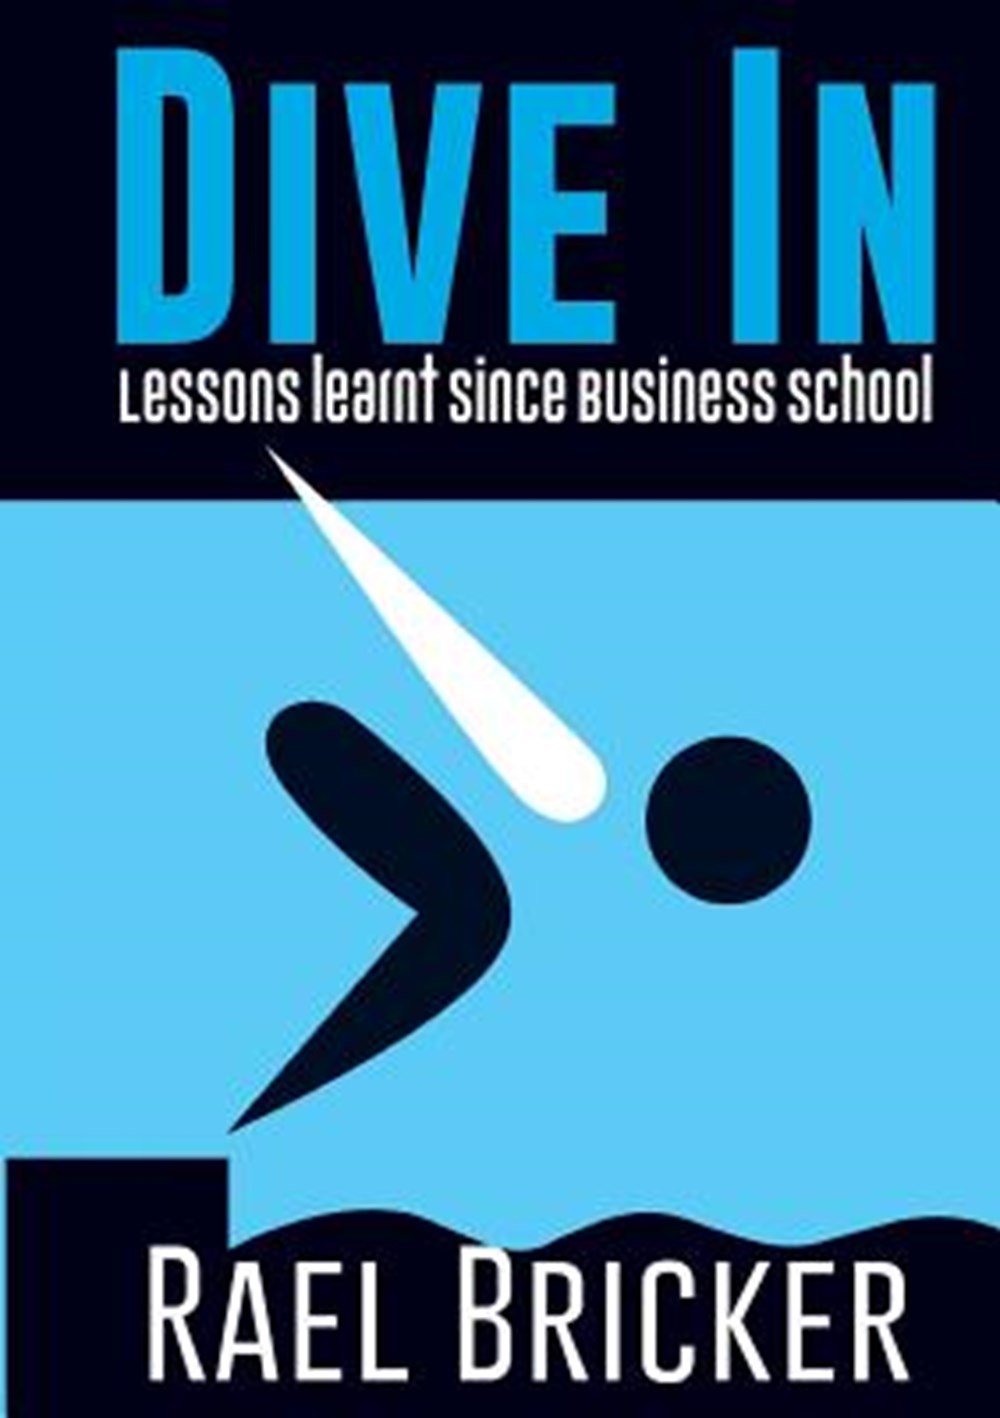 Dive in Lessons learnt since Business School